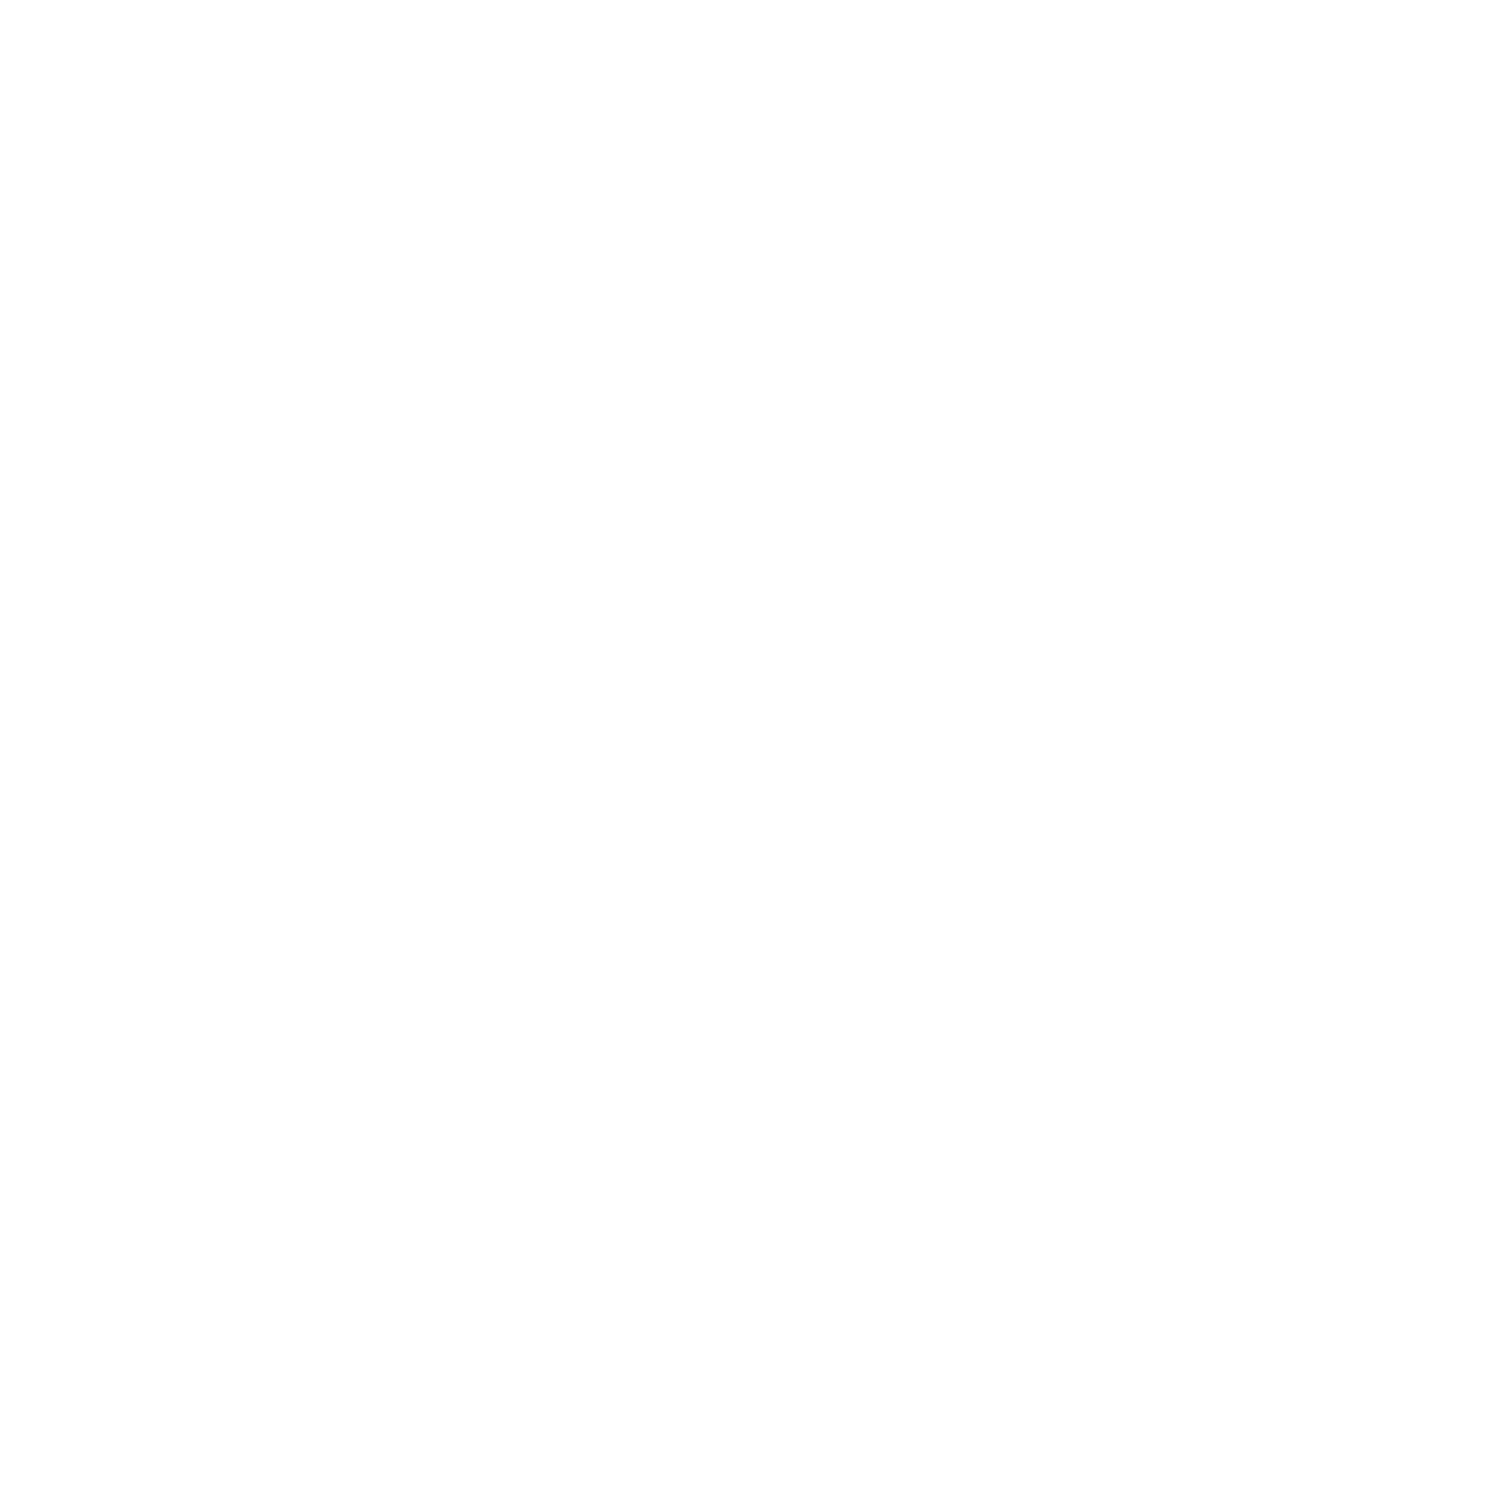 laura.png